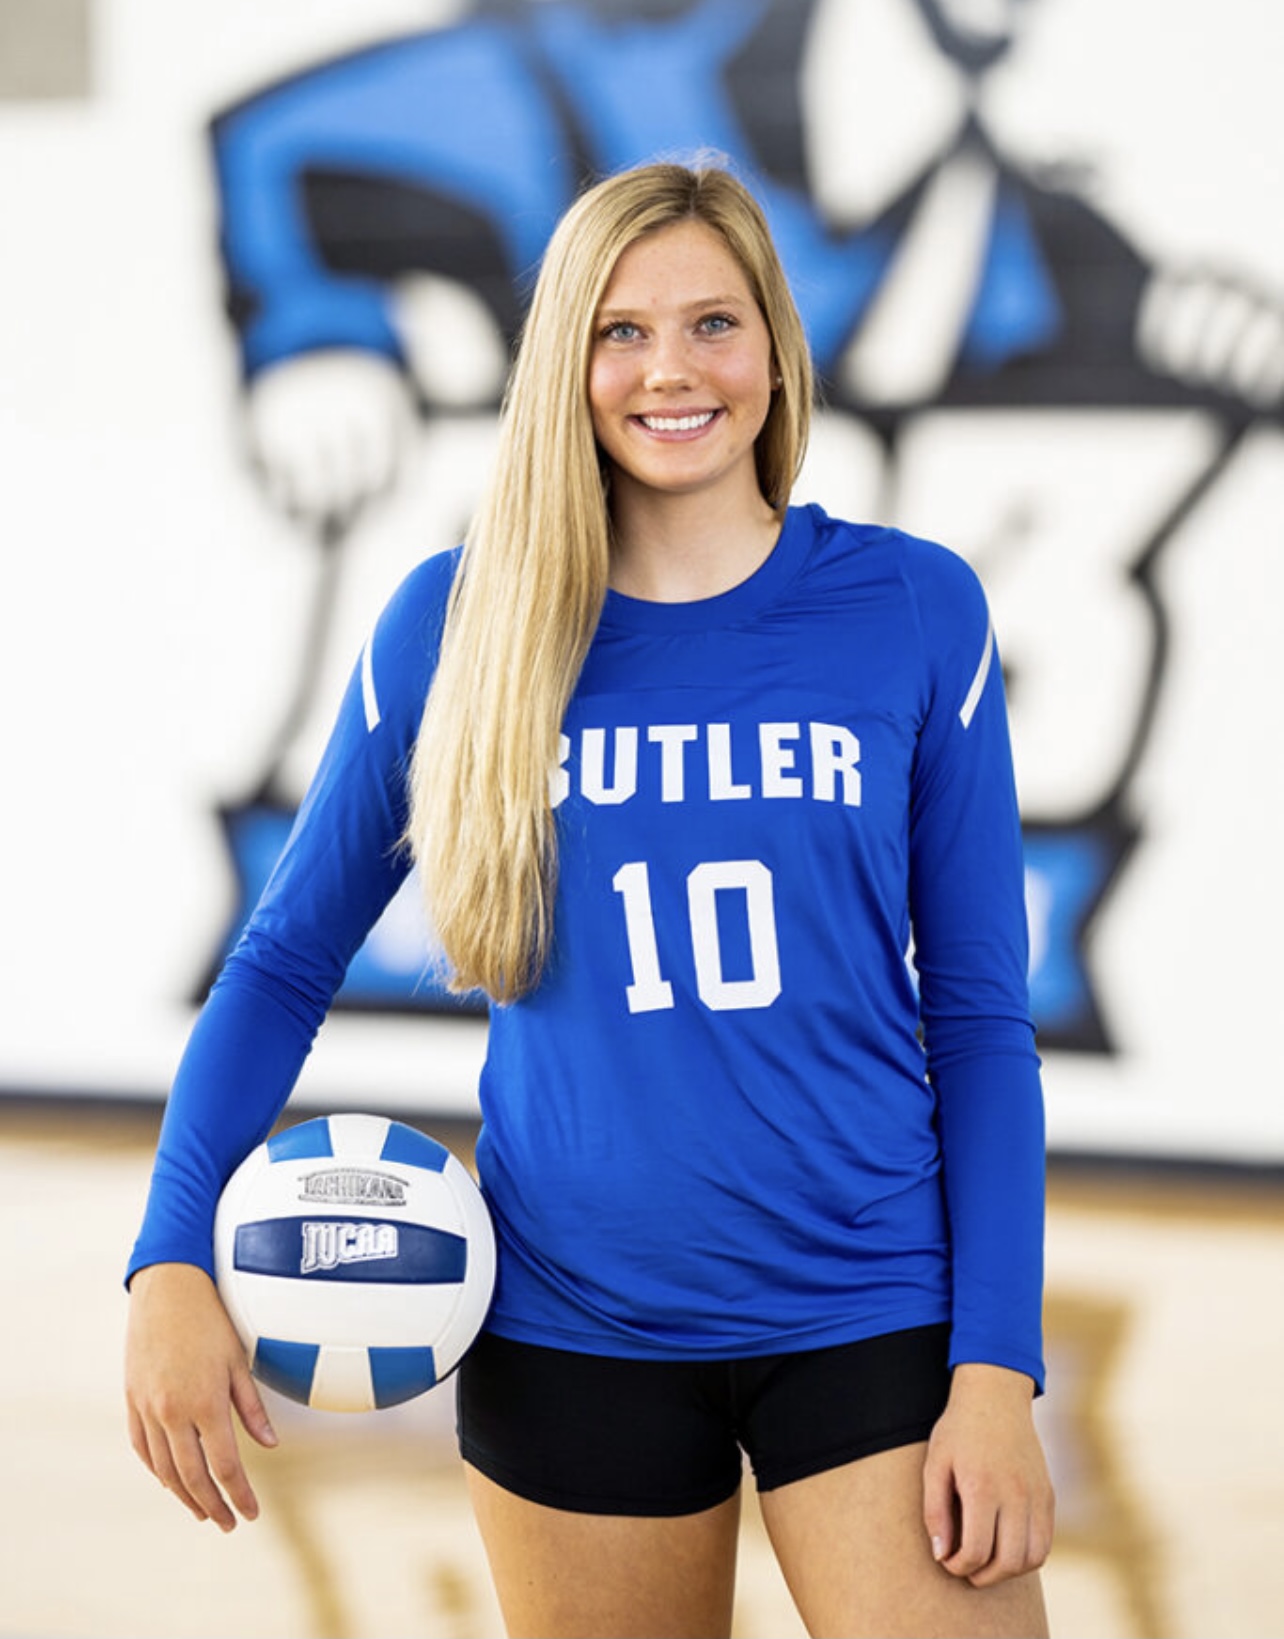 Top of Her Games Moniteau Grad Pry Among the Best in Nation in Basketball and Volleyball at Butler County Community College